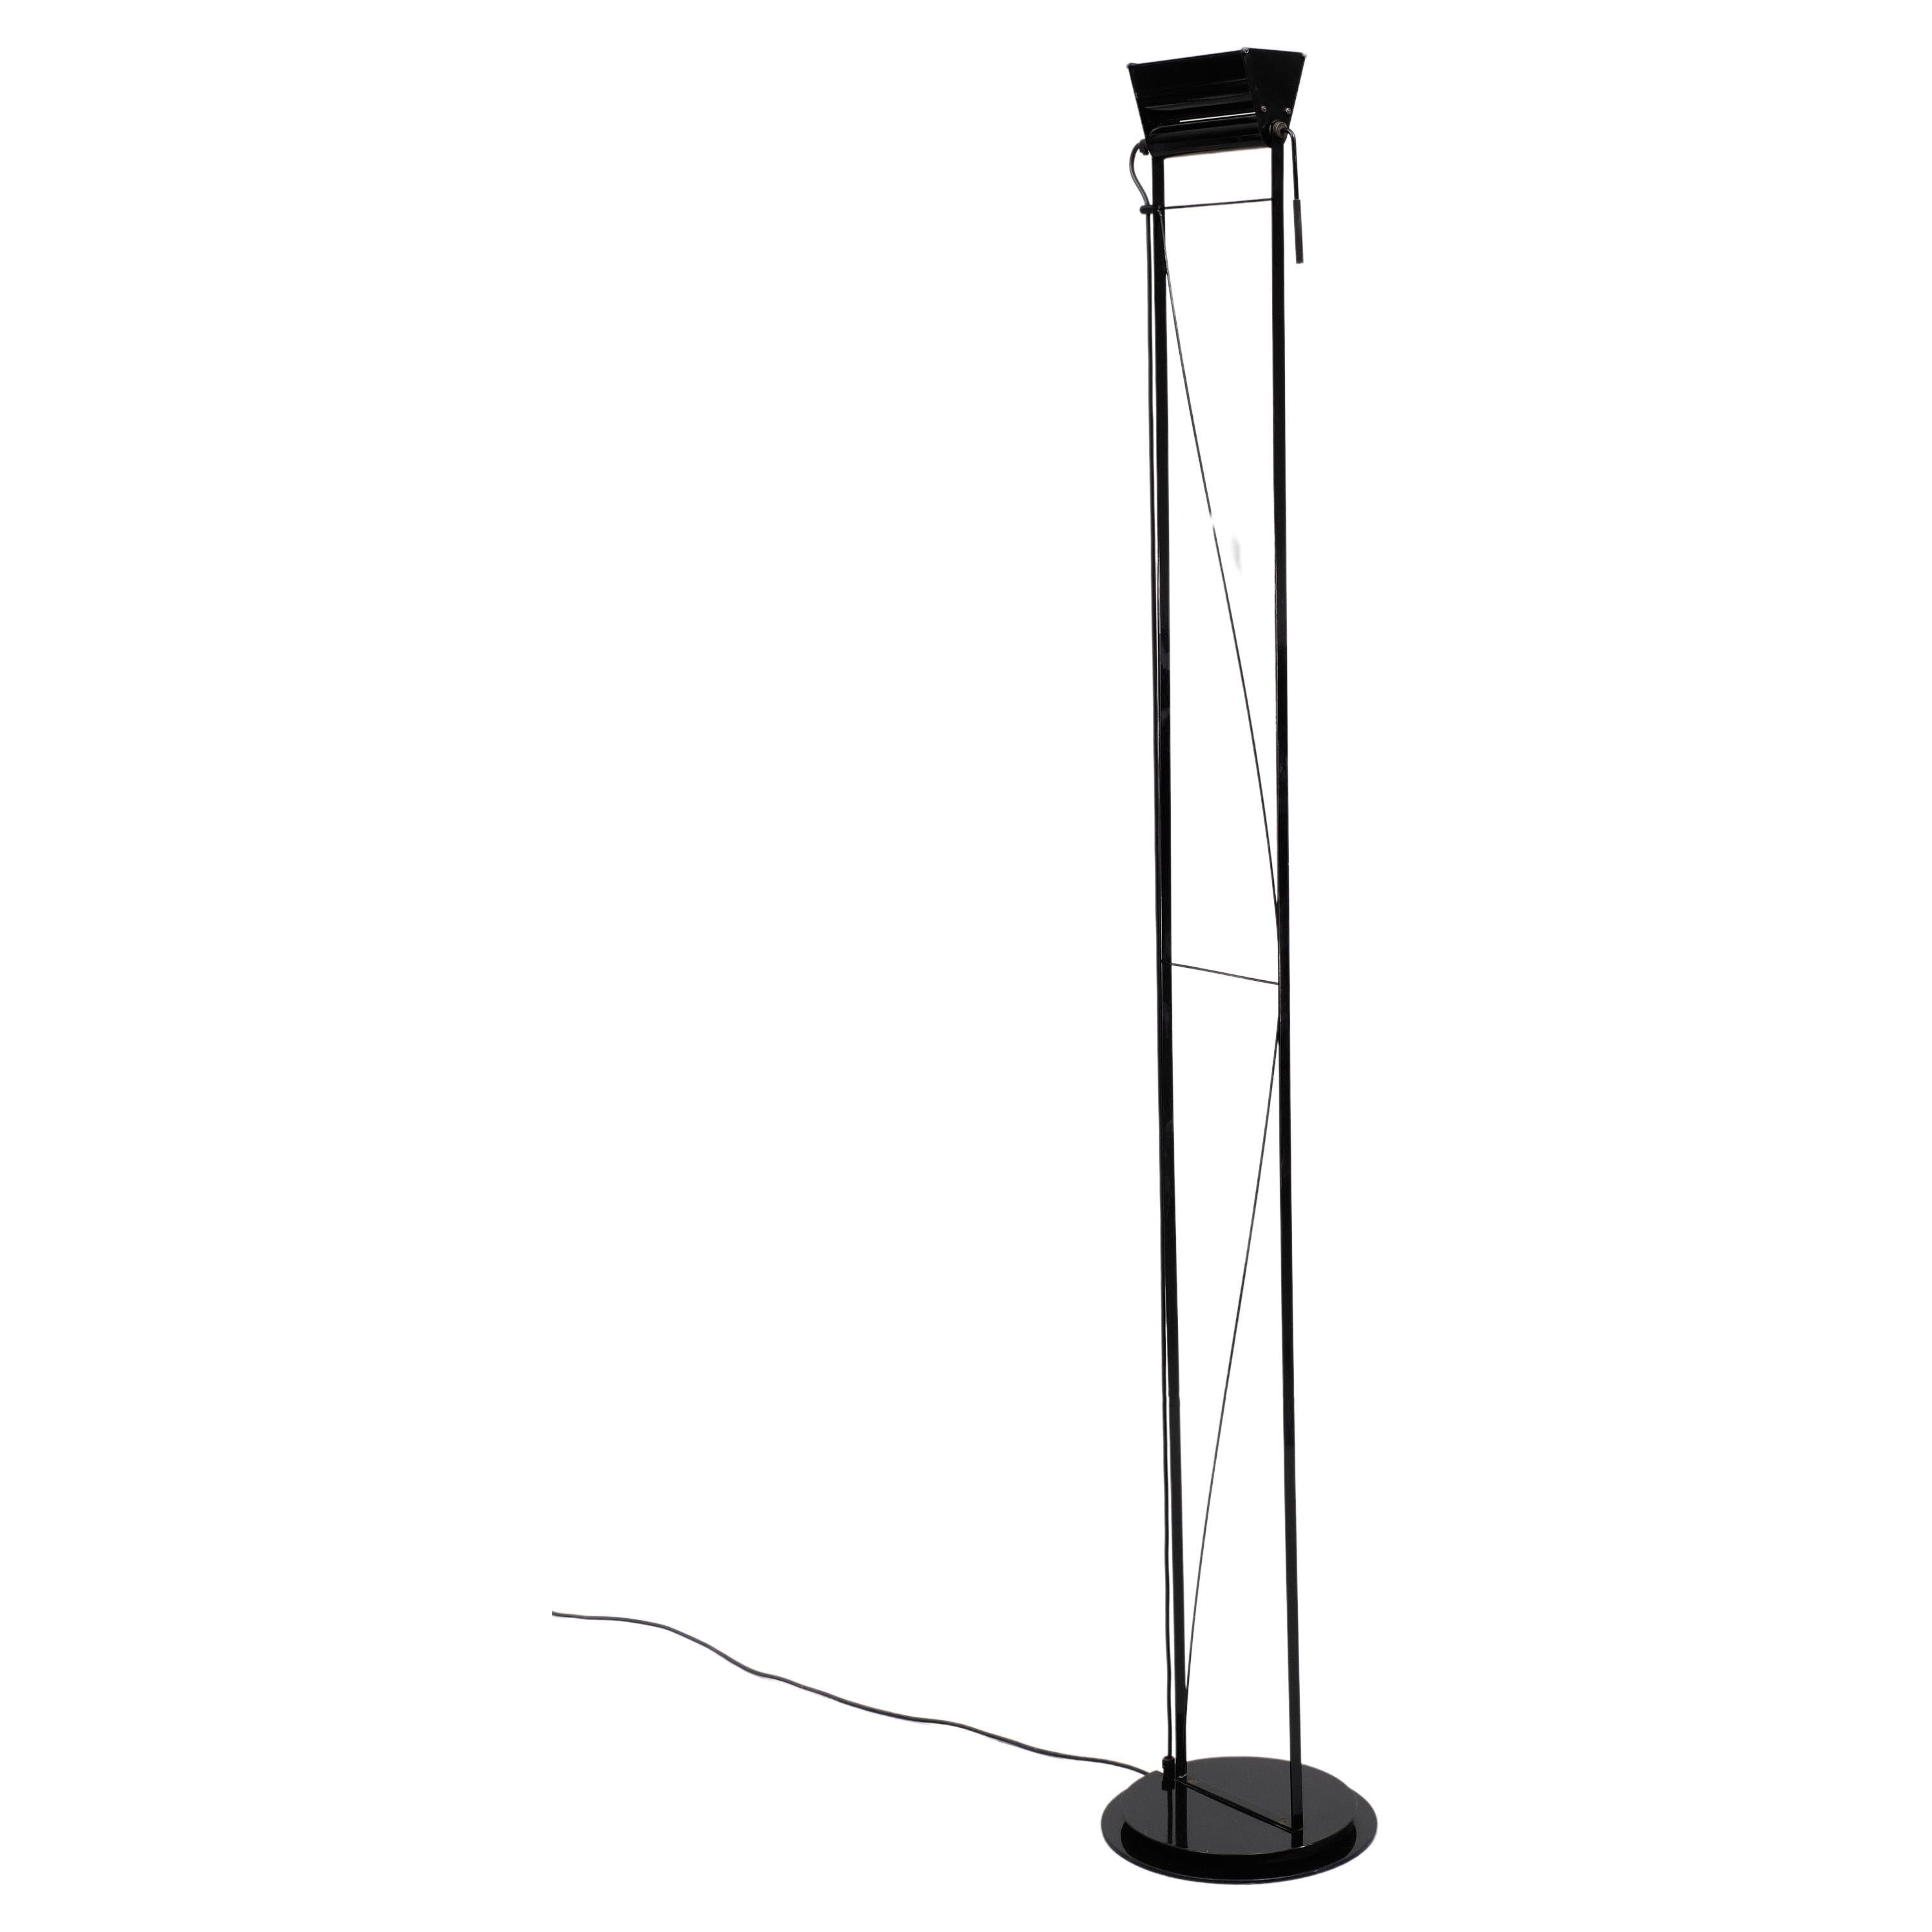 Opus floor lamp by A Monica & P Salvo for Lumina, 1980s Italy  For Sale 4